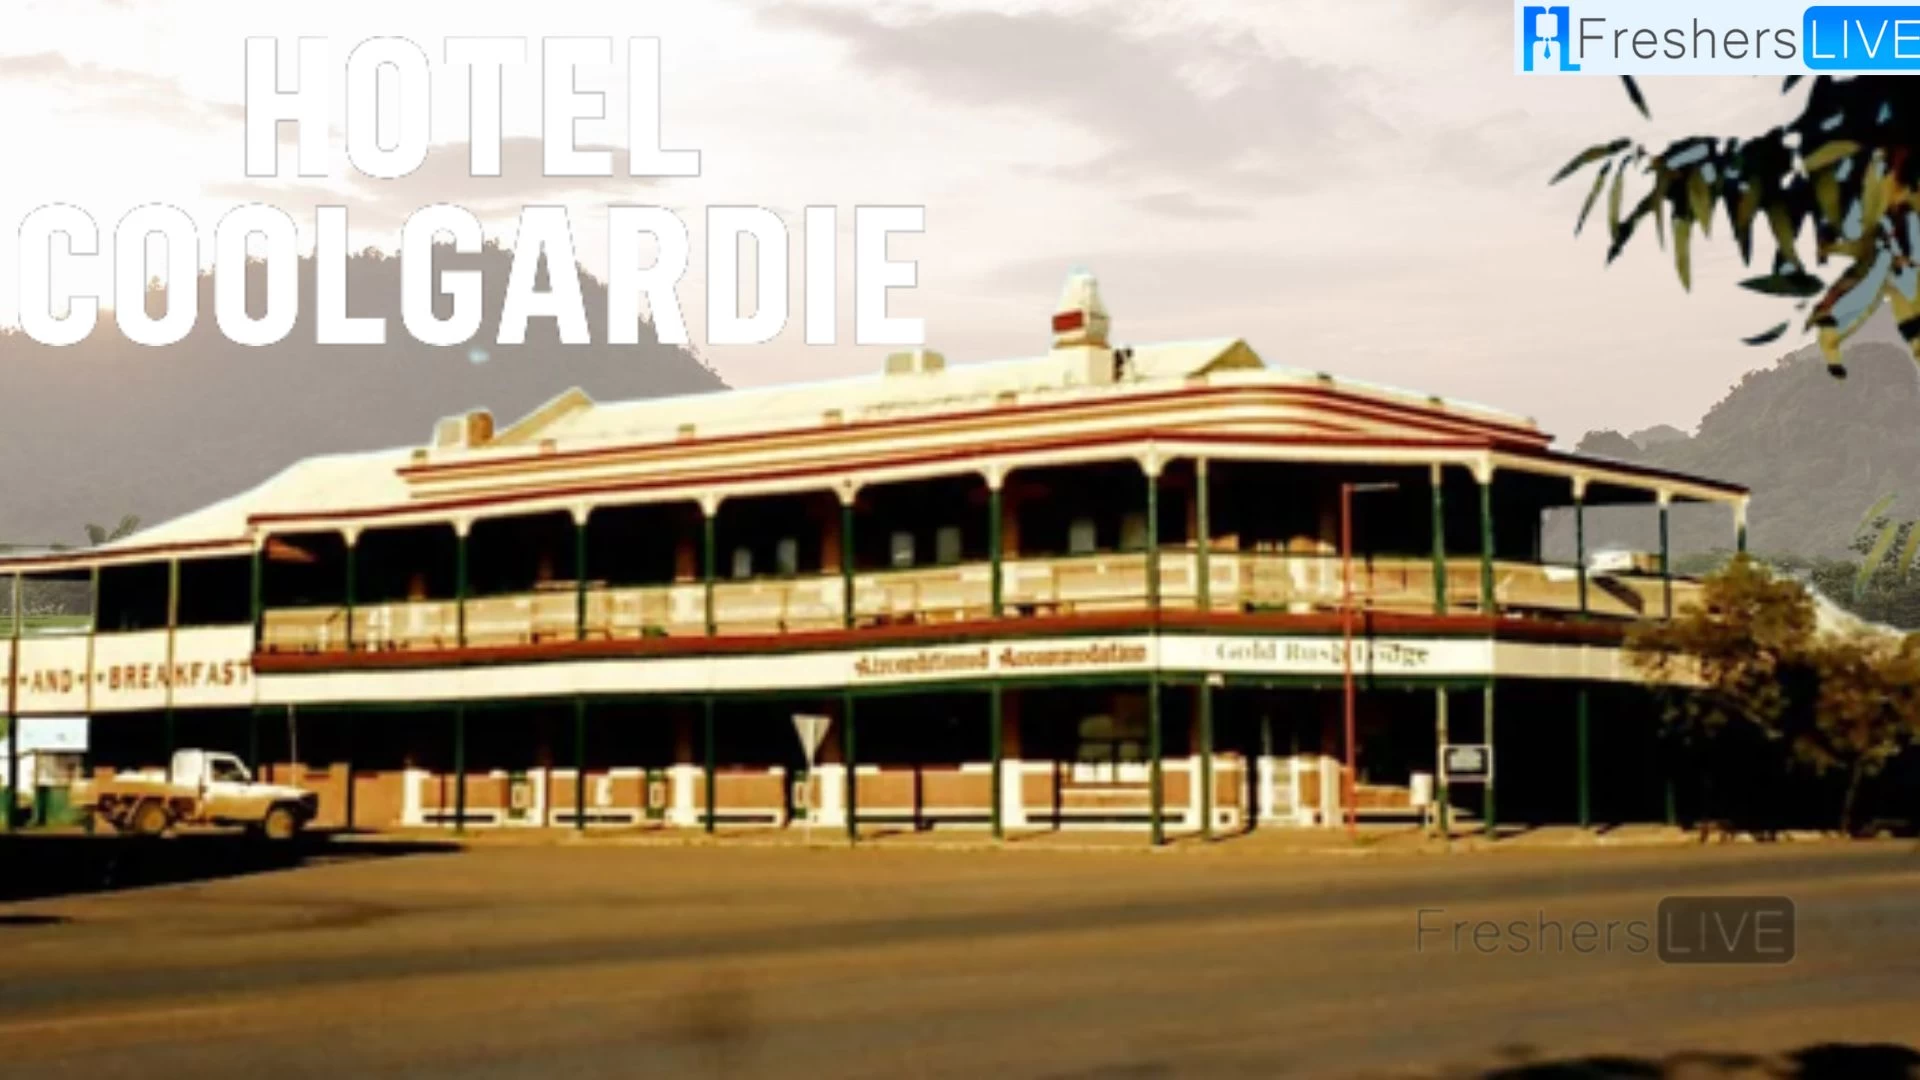 Hotel Coolgardie Ending Explained, Release Date, Cast, Plot, Summary, Where to Watch and More